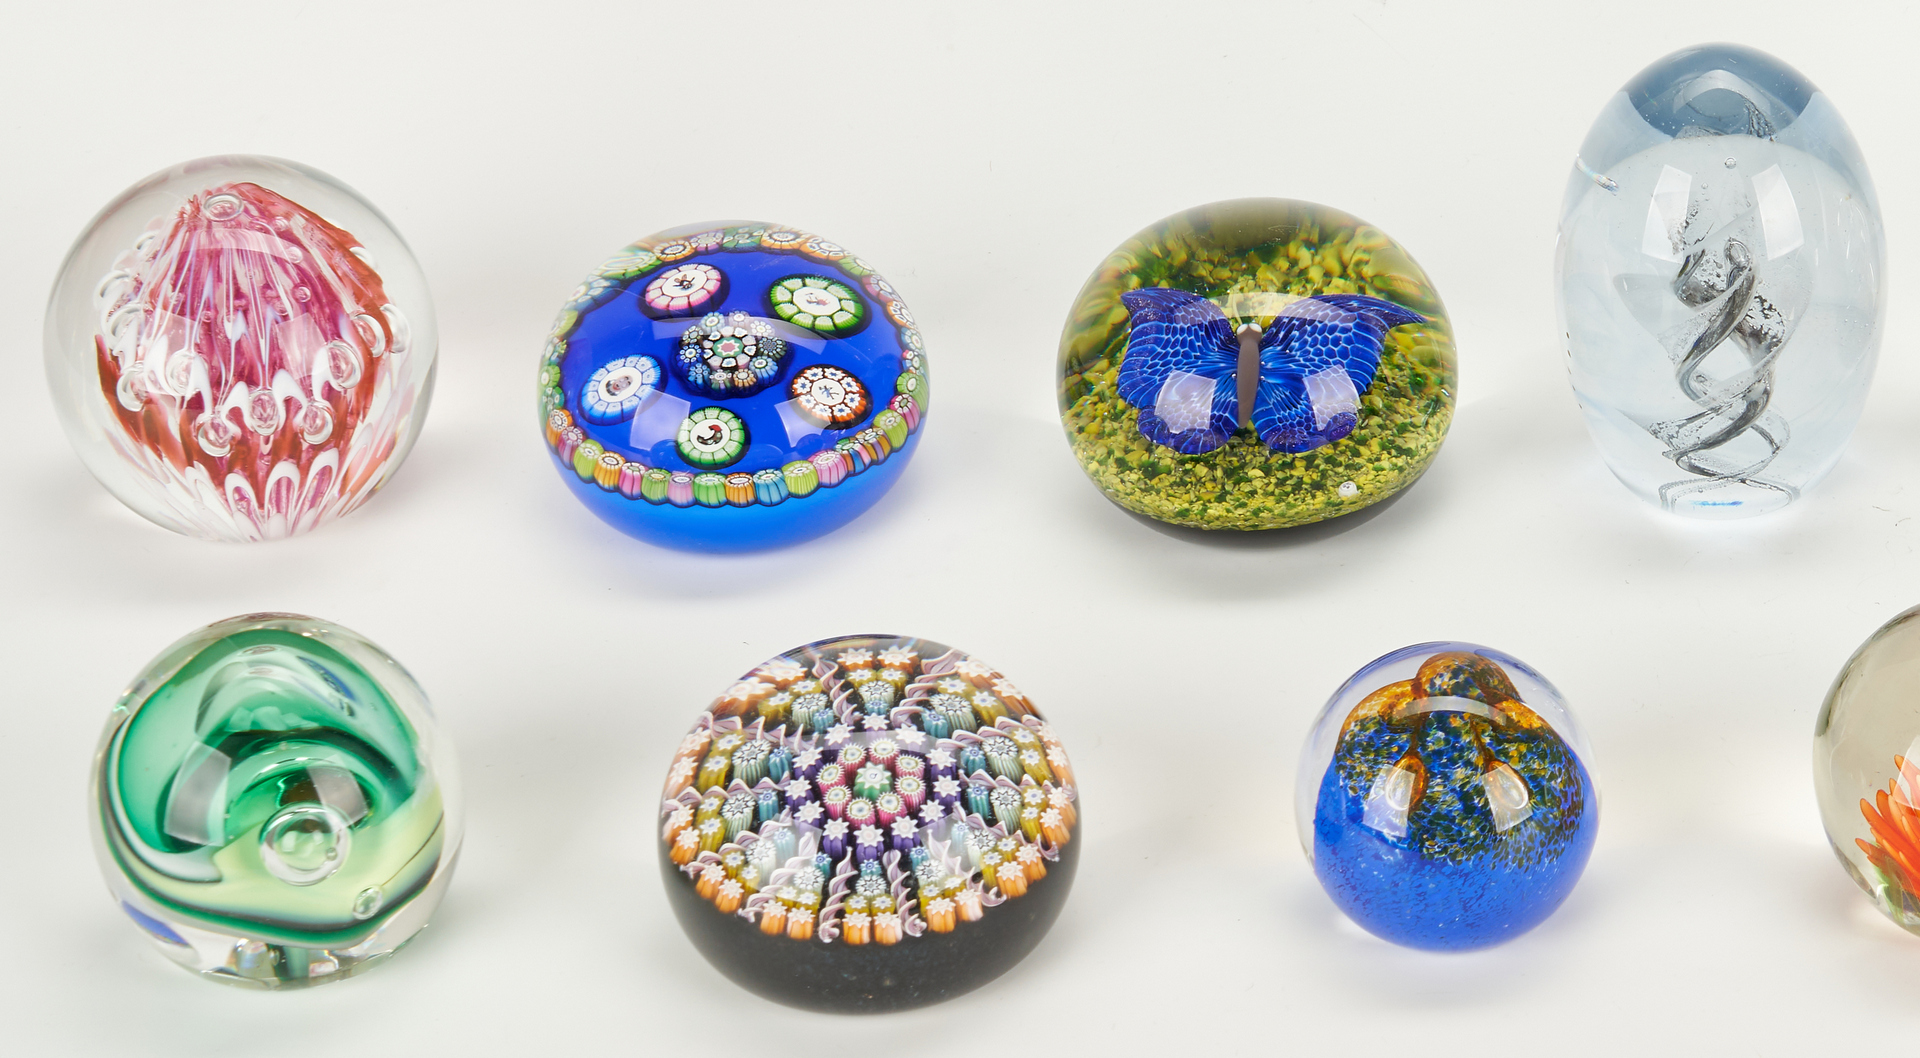 Lot 480: 15 Paperweights, incl. Baccarat, Lalique